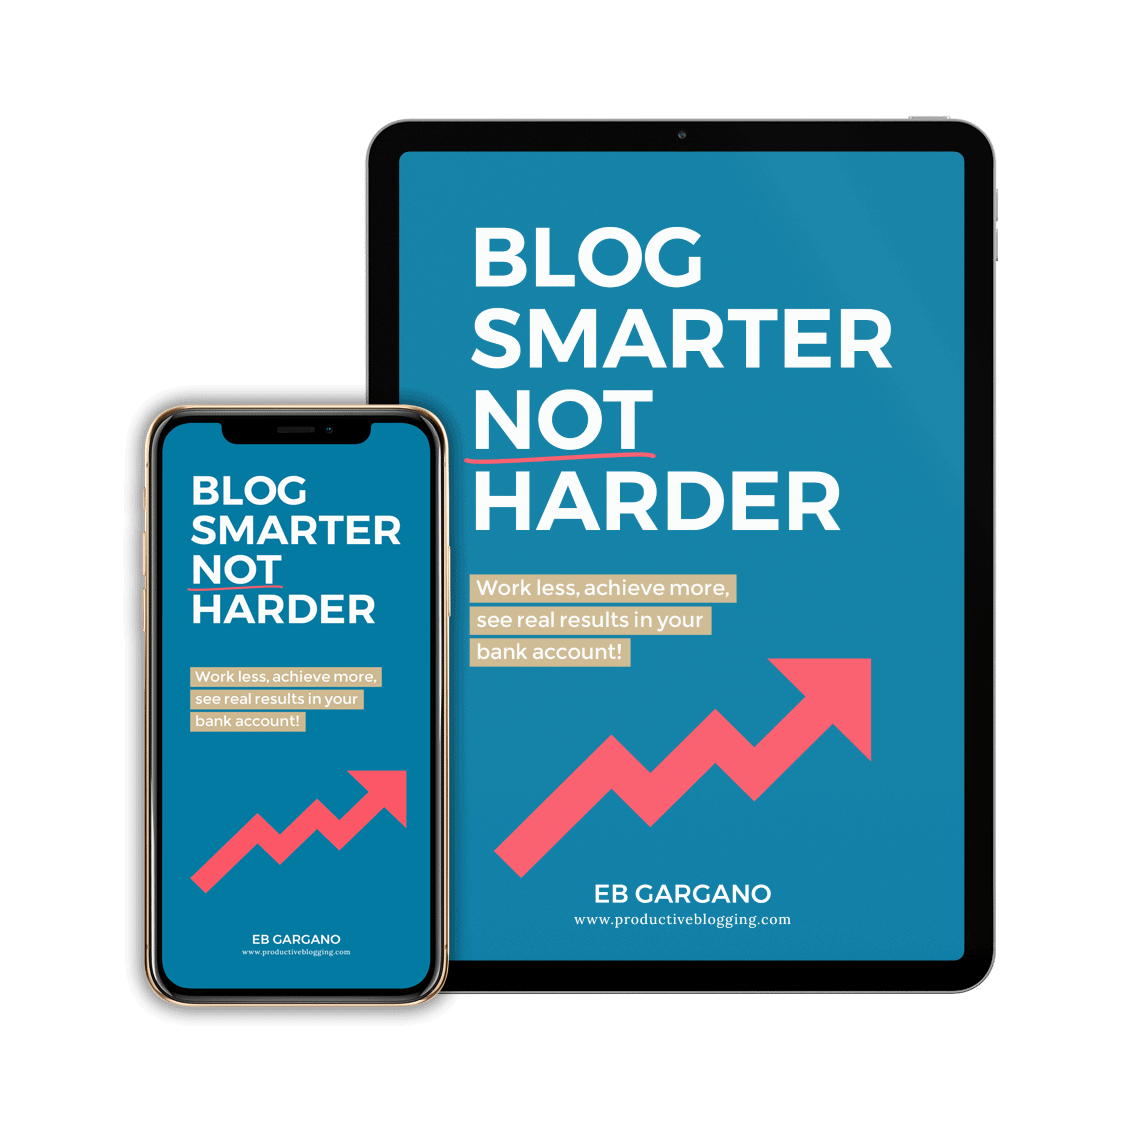 Blog Smarter Not Harder Mockup on ipad and iphone